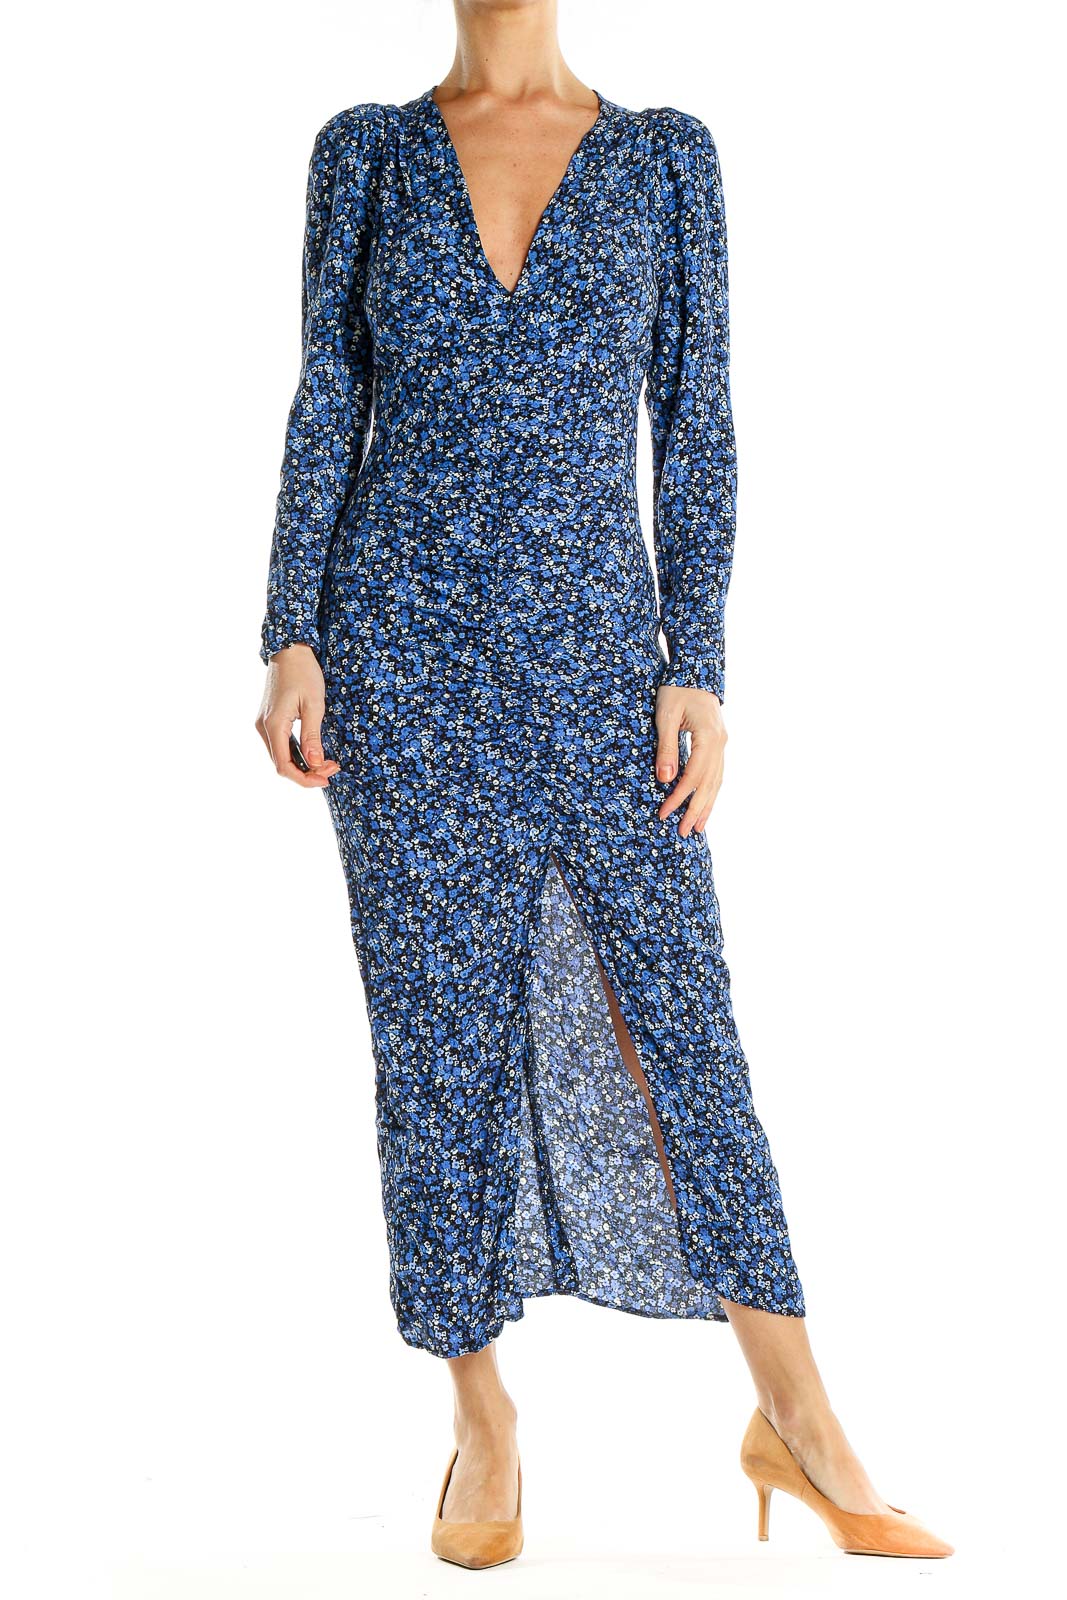 Blue Floral Print Maxi Dress With Slit Front